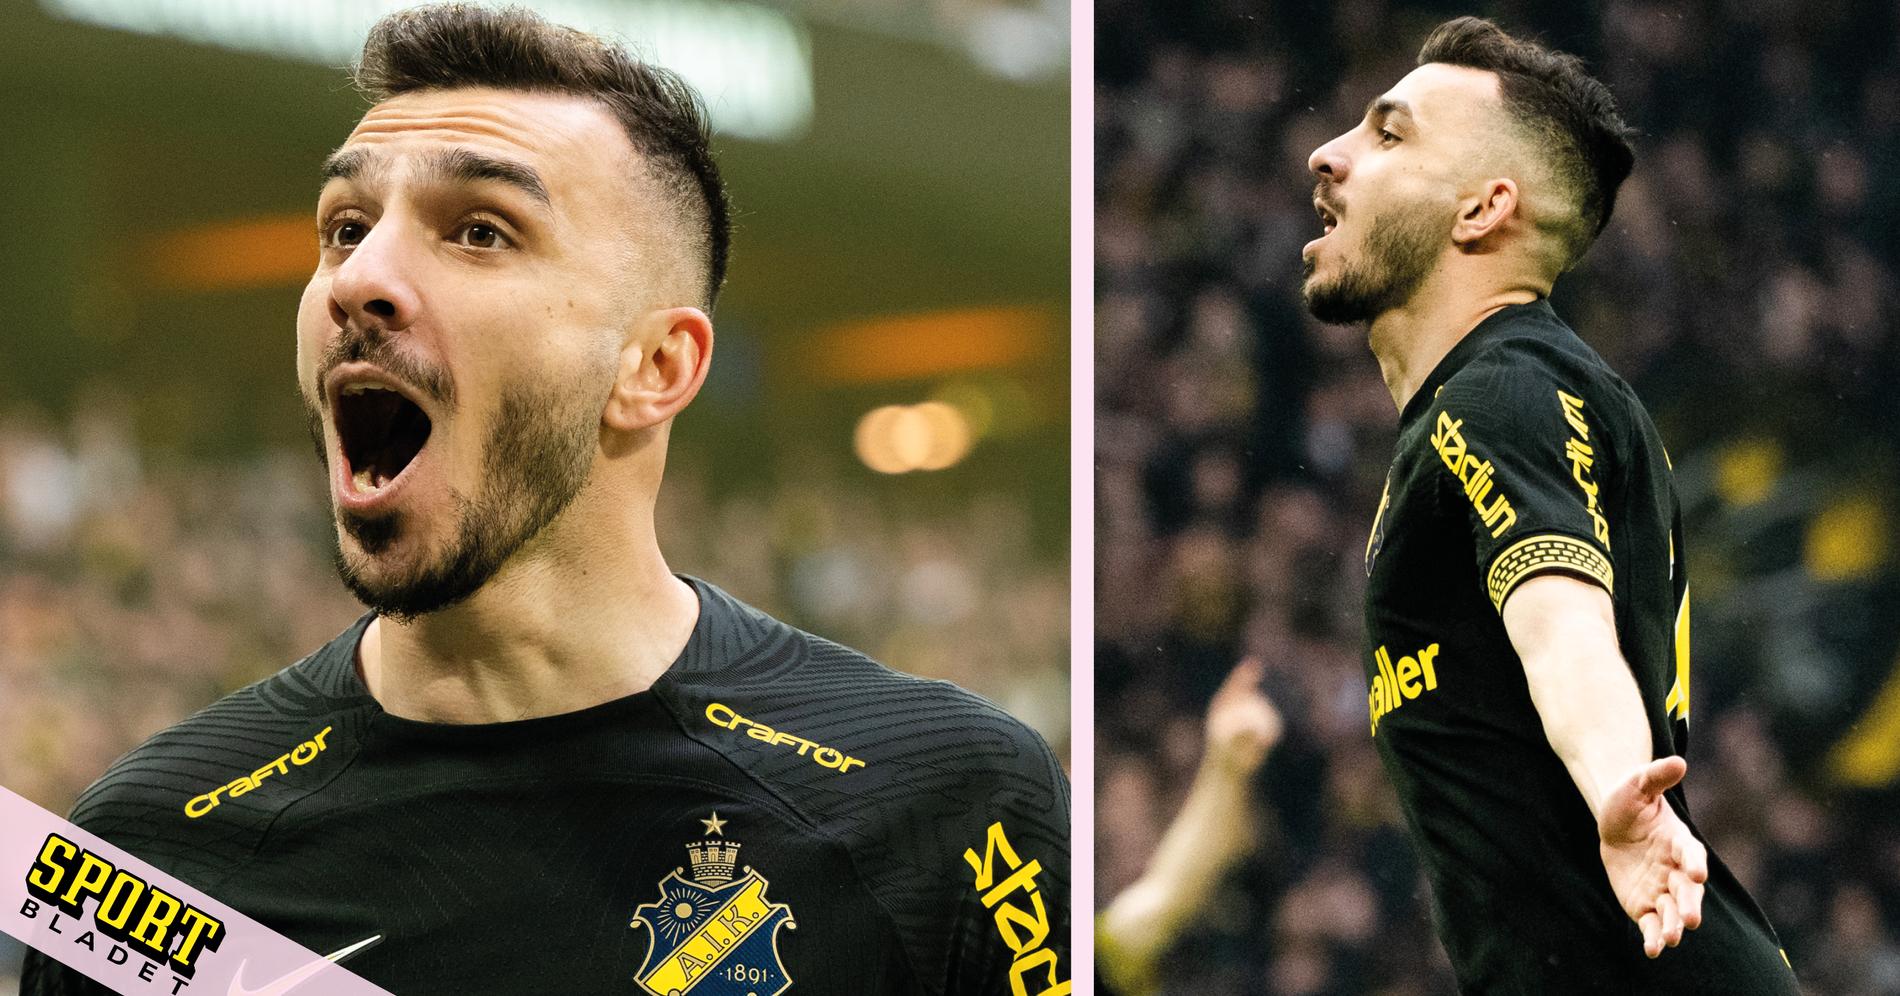 Ioannis Pittas Scores Two Goals in AIK: Scout from AEK Athens Watches, Potential Transfer Looming